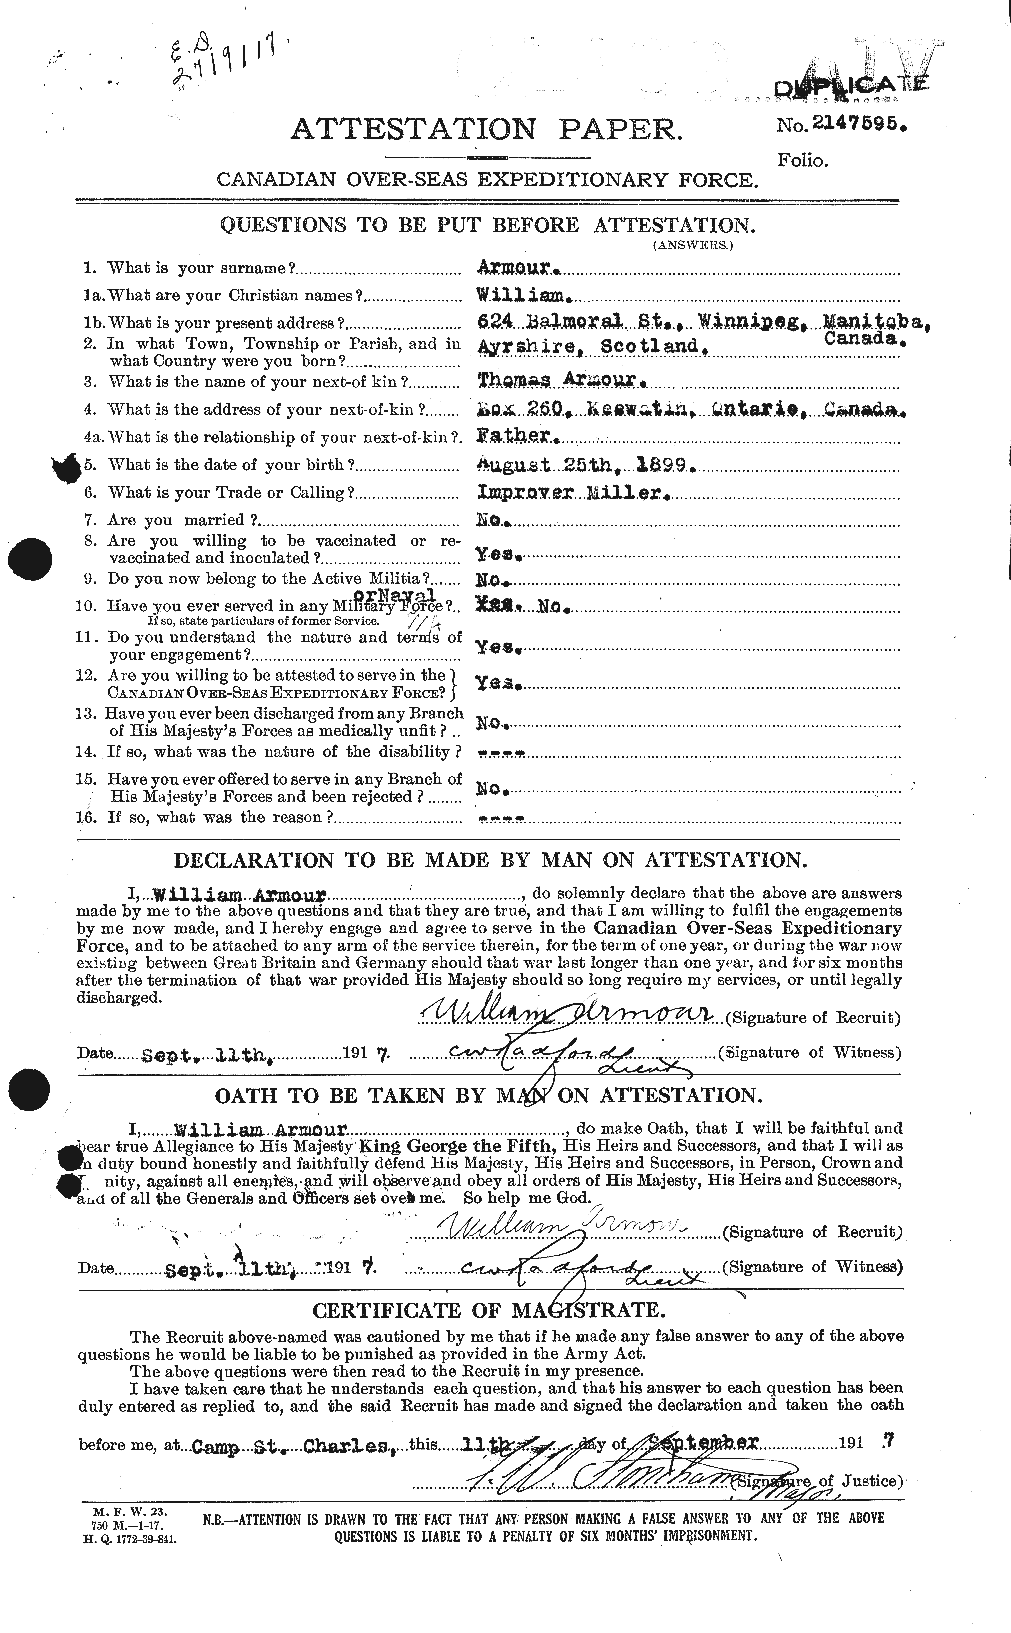 Personnel Records of the First World War - CEF 214033a